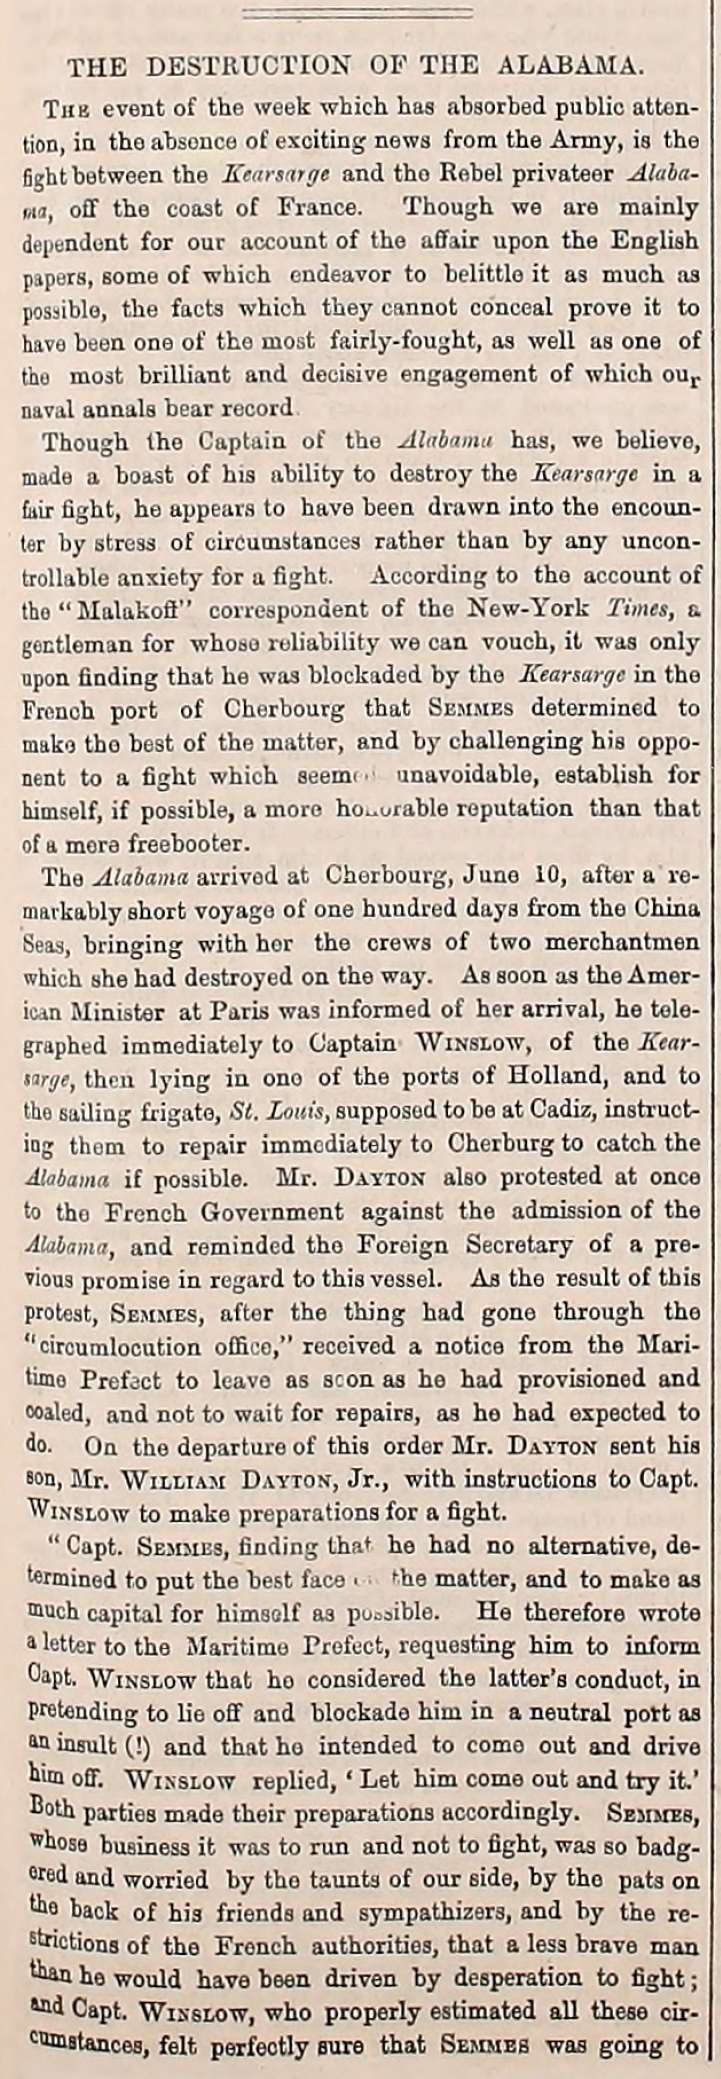 Army Navy Journal article on the June 19, 1864 sinking of the CSS Alabama by the USS Kearsarge off the coast of Cherbourg, France